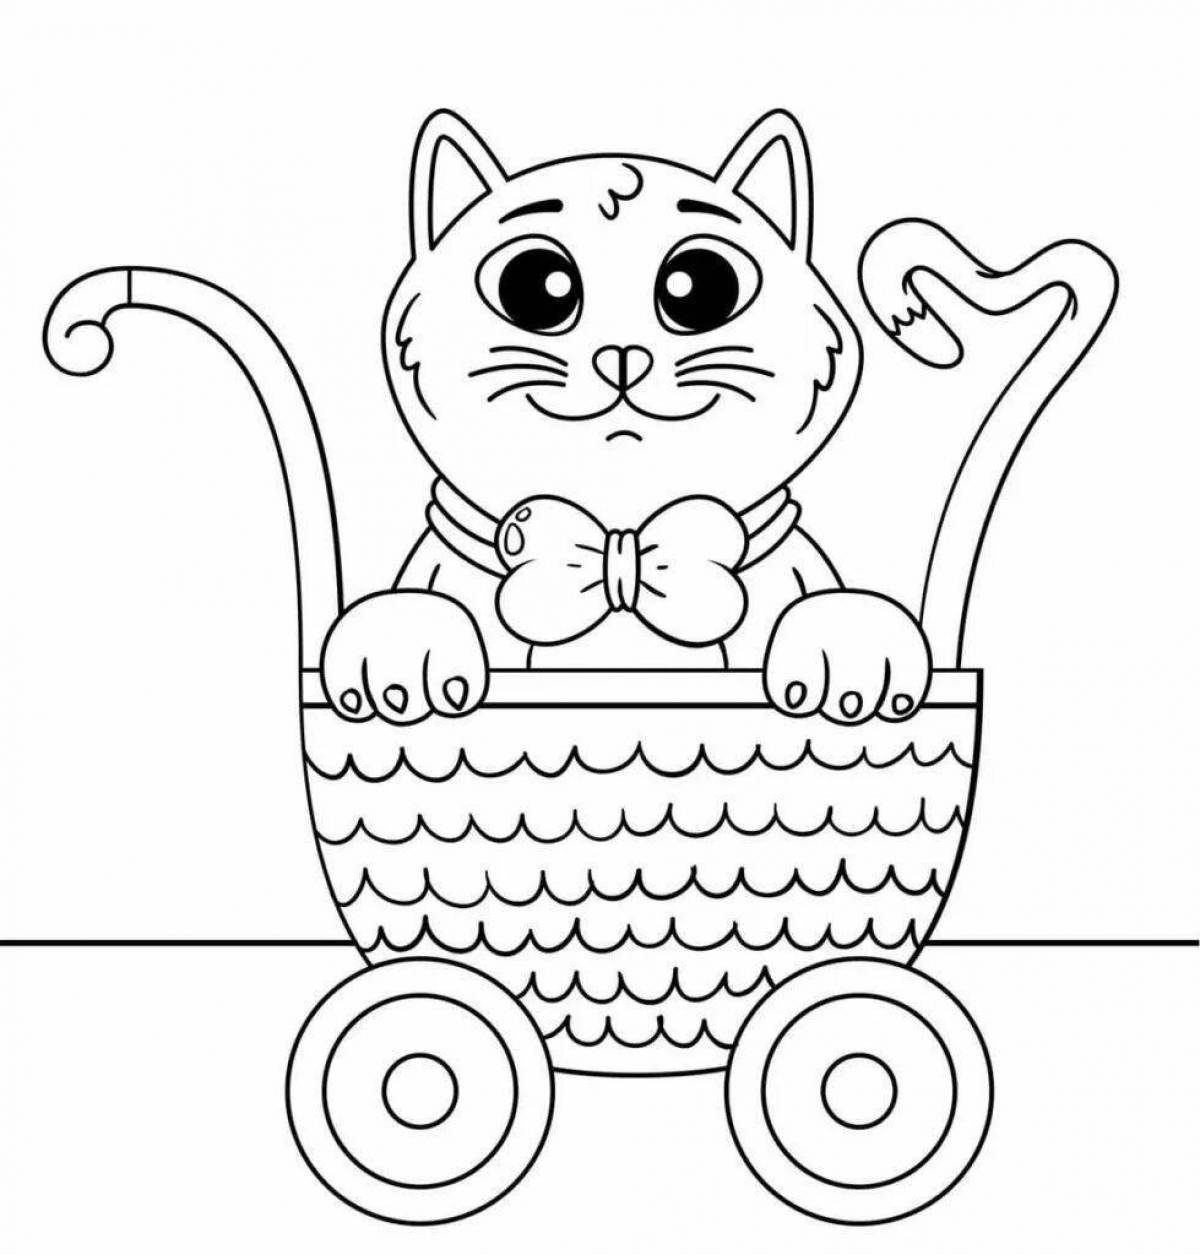 Coloring page dazzling cat